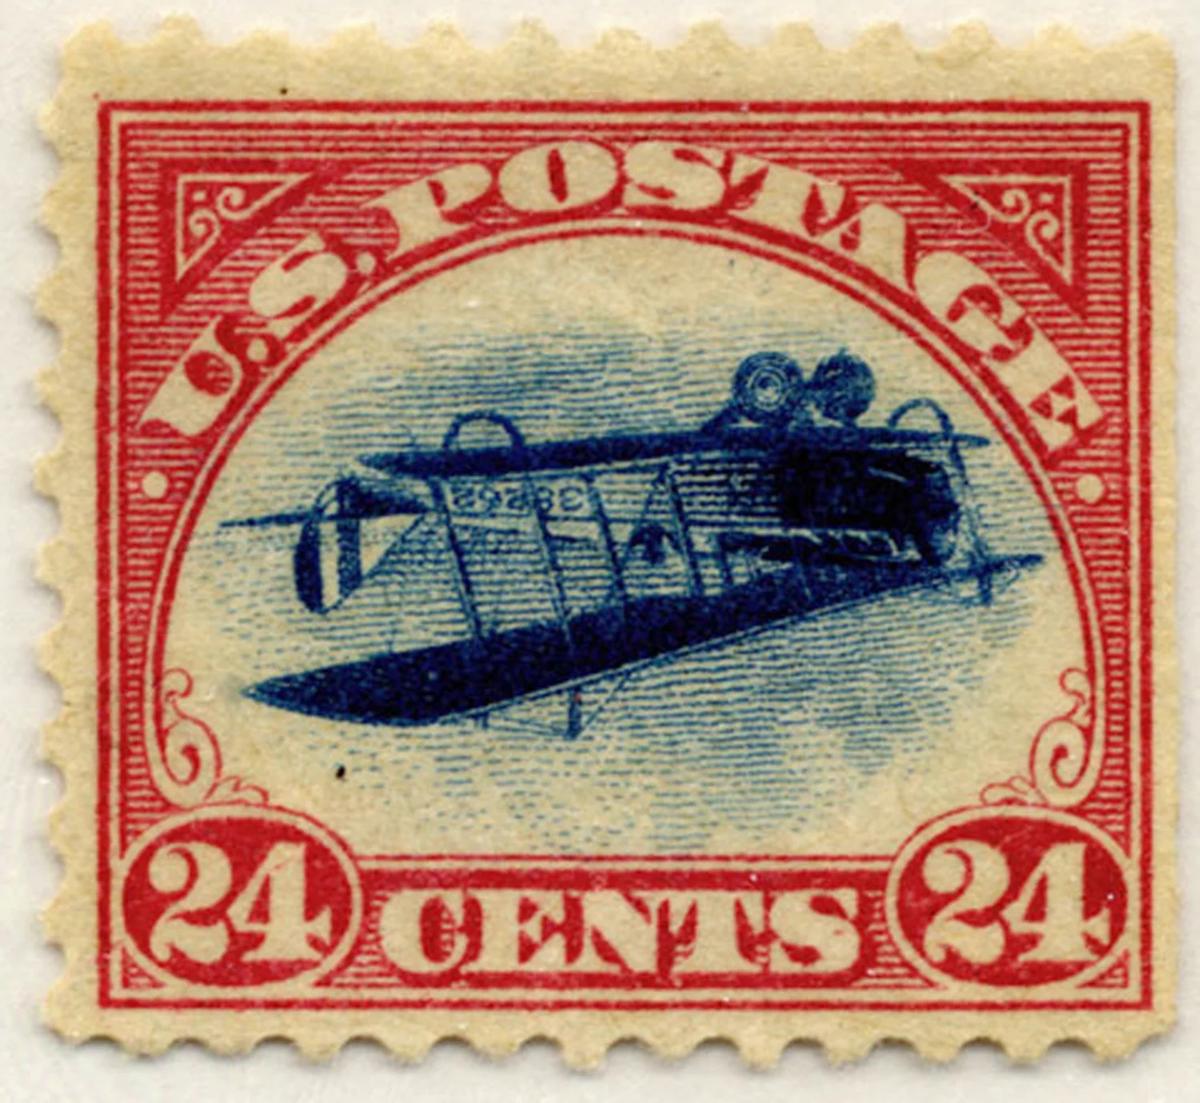 Known as the Inverted Jenny, only one pane of 100 of these “error stamps” printed in 1918 have been found to date, making it quite valuable and a great investment candidate. (Courtesy of National Postal Museum)